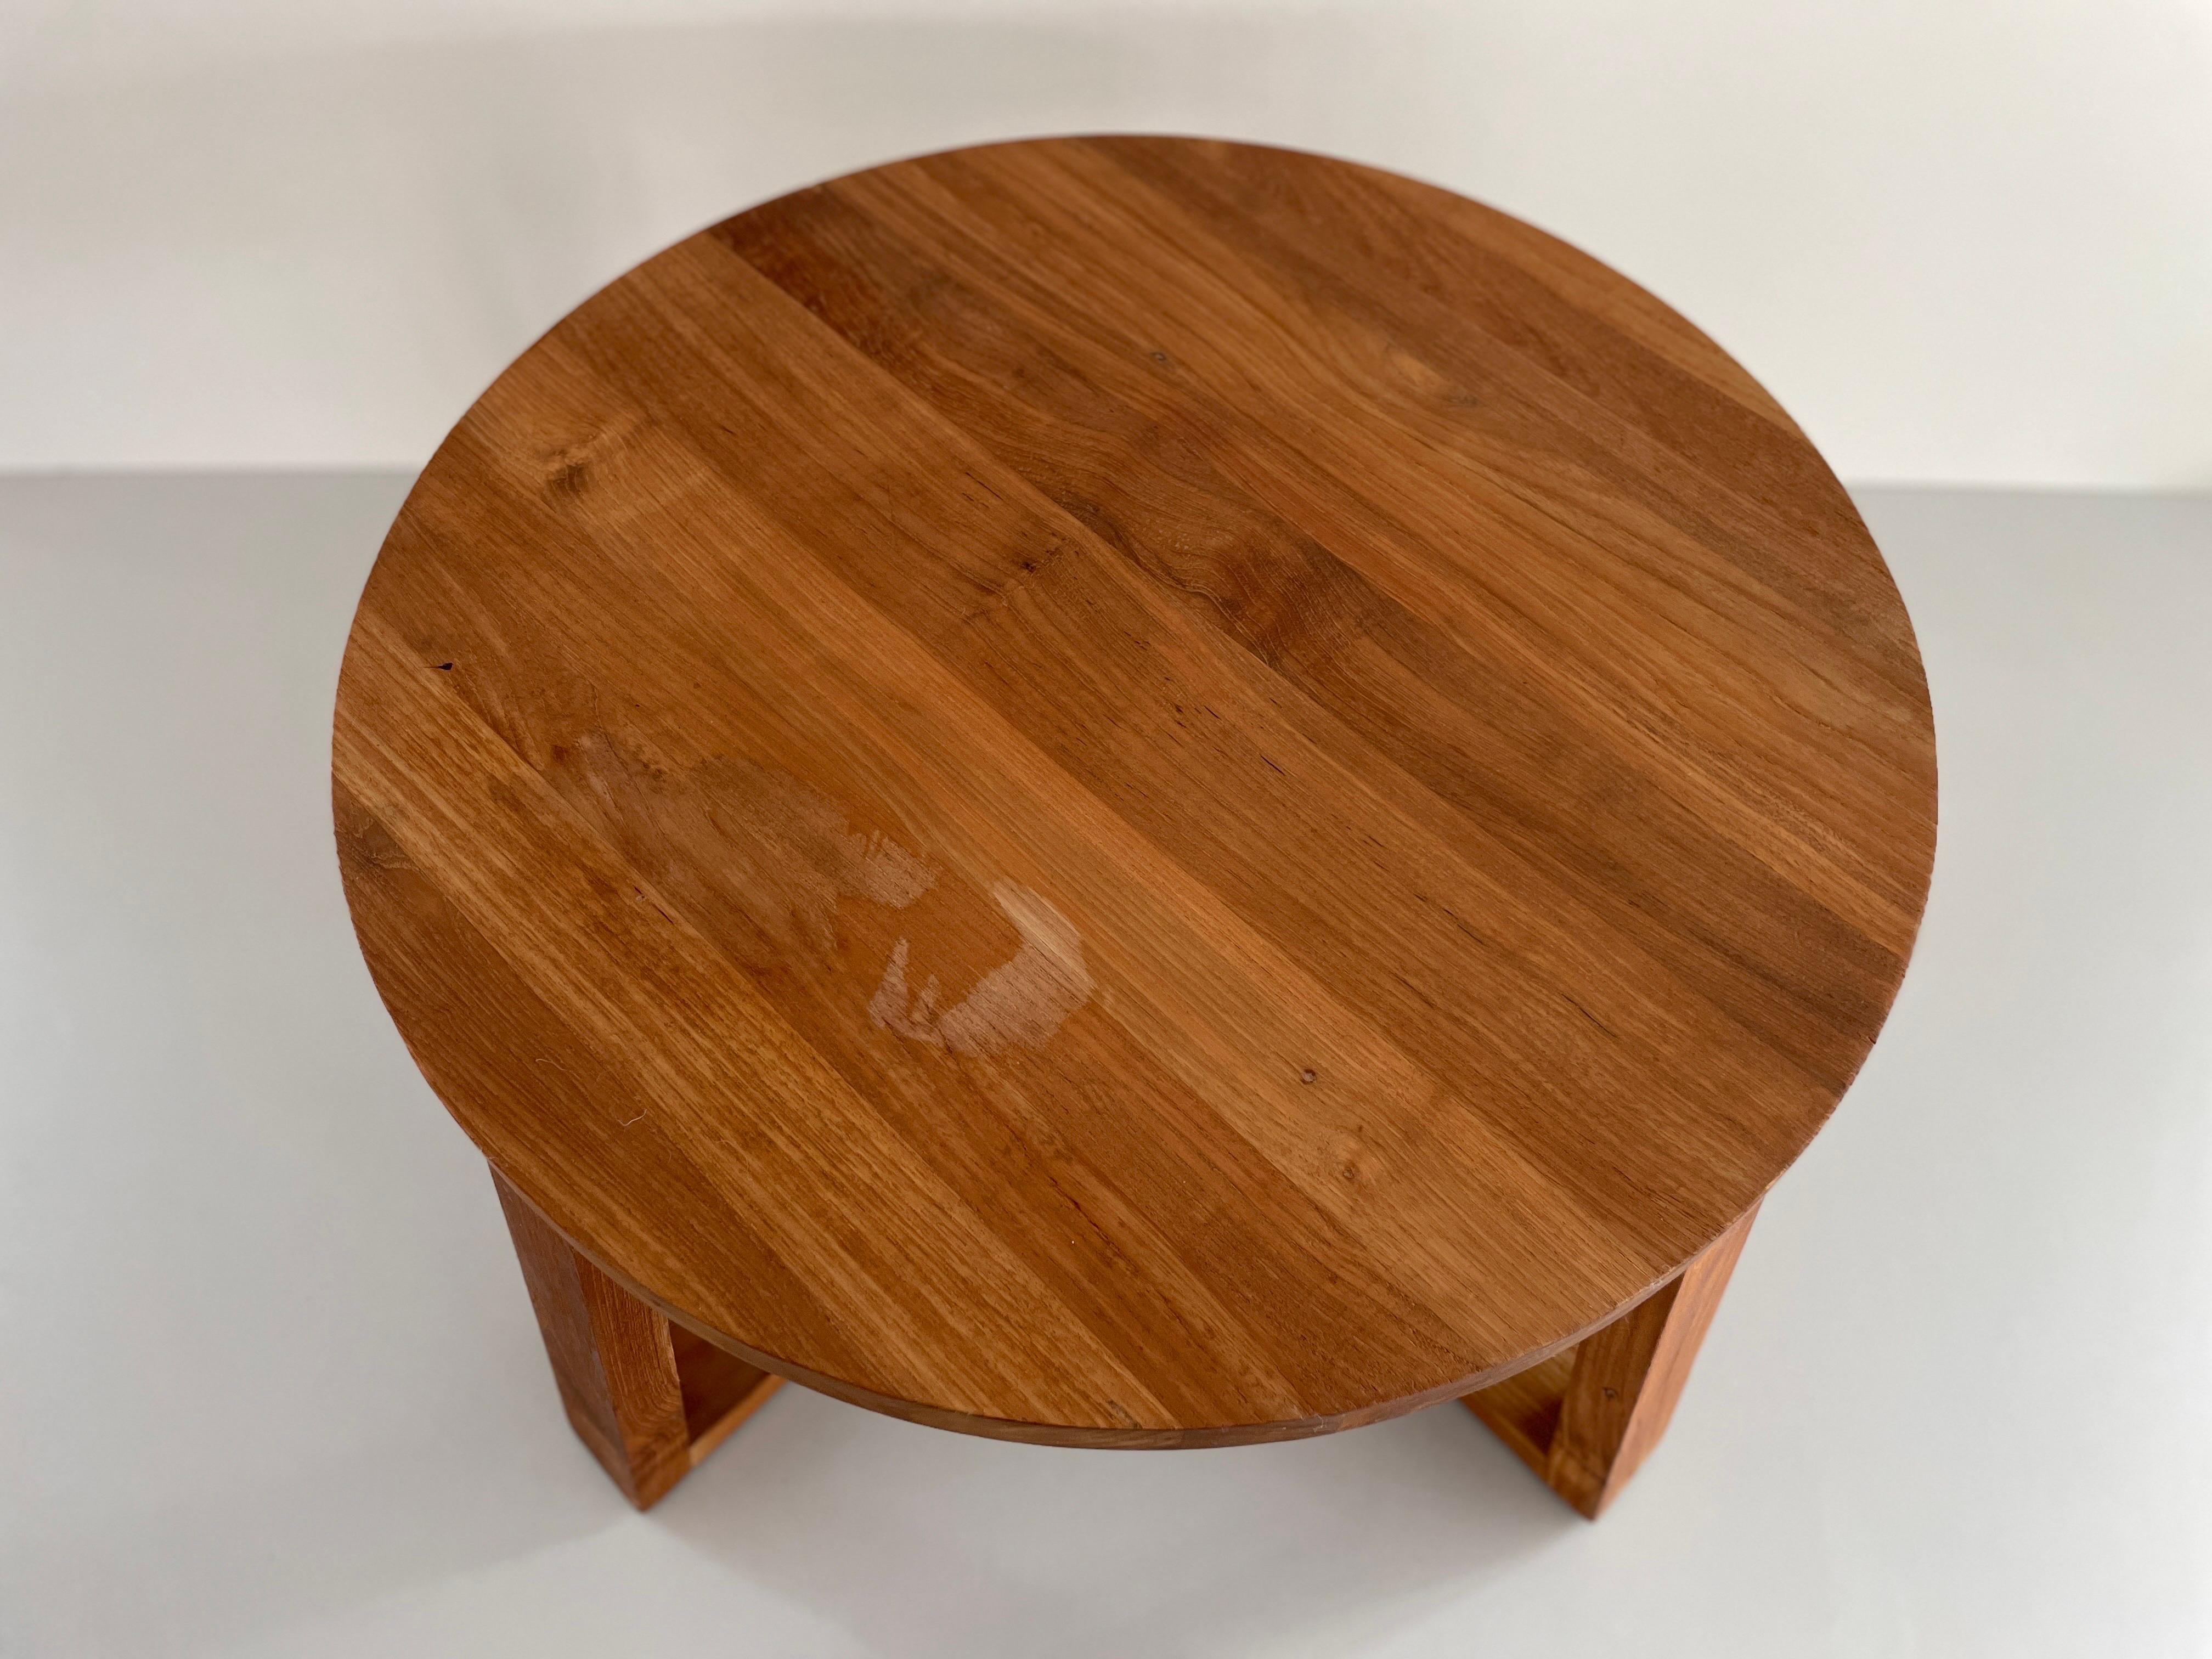 Minimalist Design Round Thick Wood Living Room Table, 1960s, Denmark 4